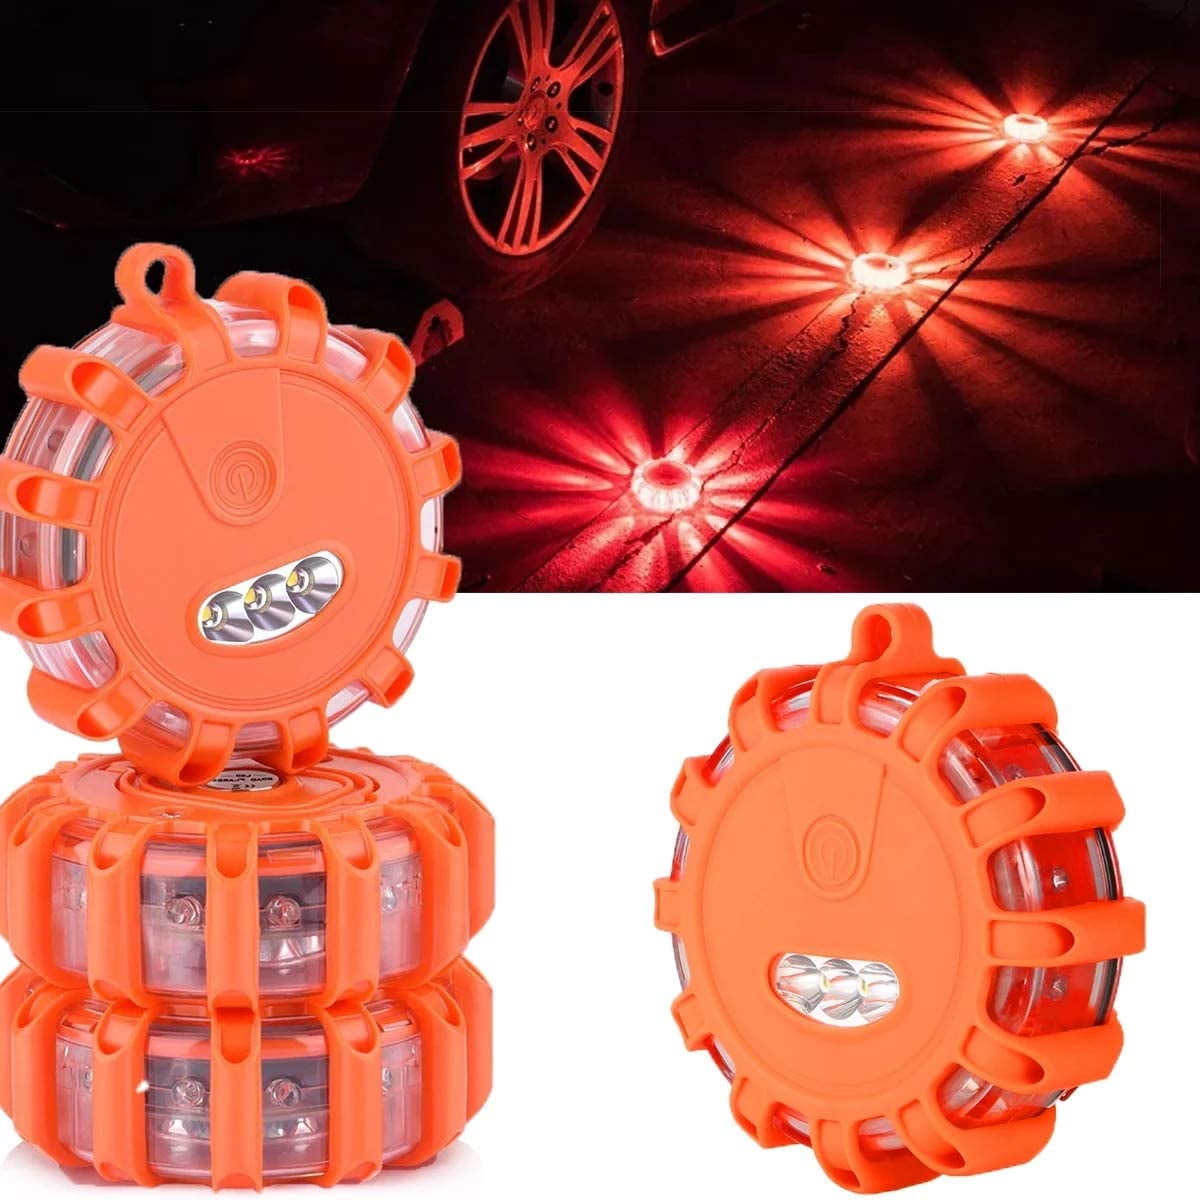 LED Safety Road Flares Emergency Lights,Flashing Warning Ride Light Batteries Not Included Roadside Safety Beacon Disc Flashing Warning Light with Magnetic Base & Hook for Vehicles Truck Boats 